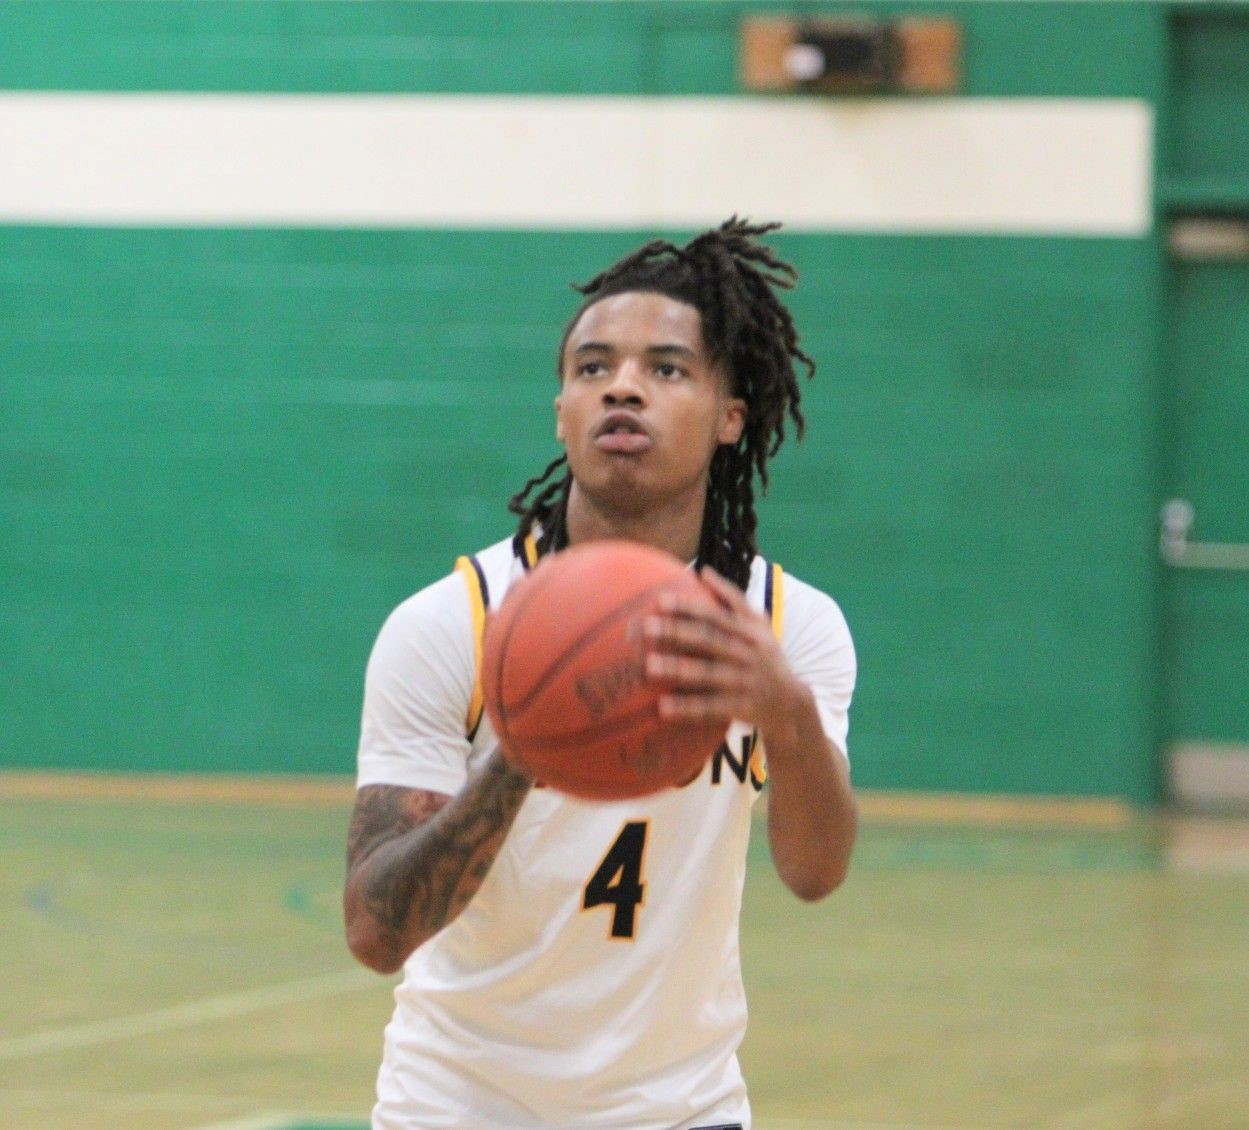 Asil Hoyle had his first career double double with career-highs of 10 rebounds and 13 assists in Saturday's game at Brunswick Community College.